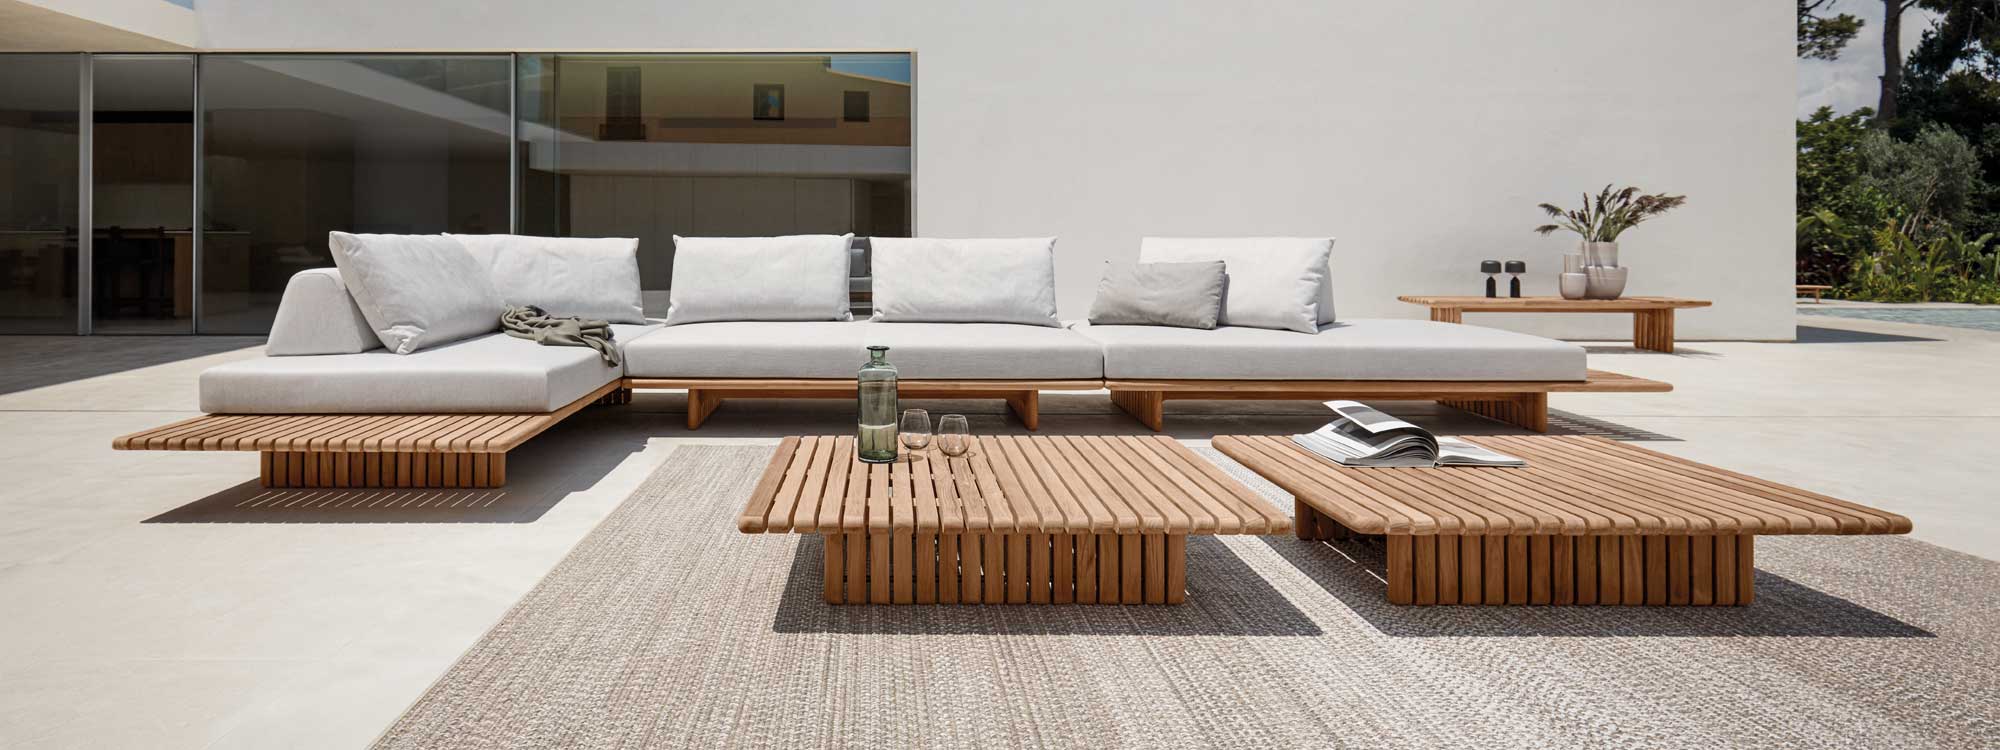 Image of Gloster Deck minimalist teak corner sofa on sunny terrace with central coffee table on an outdoor rug